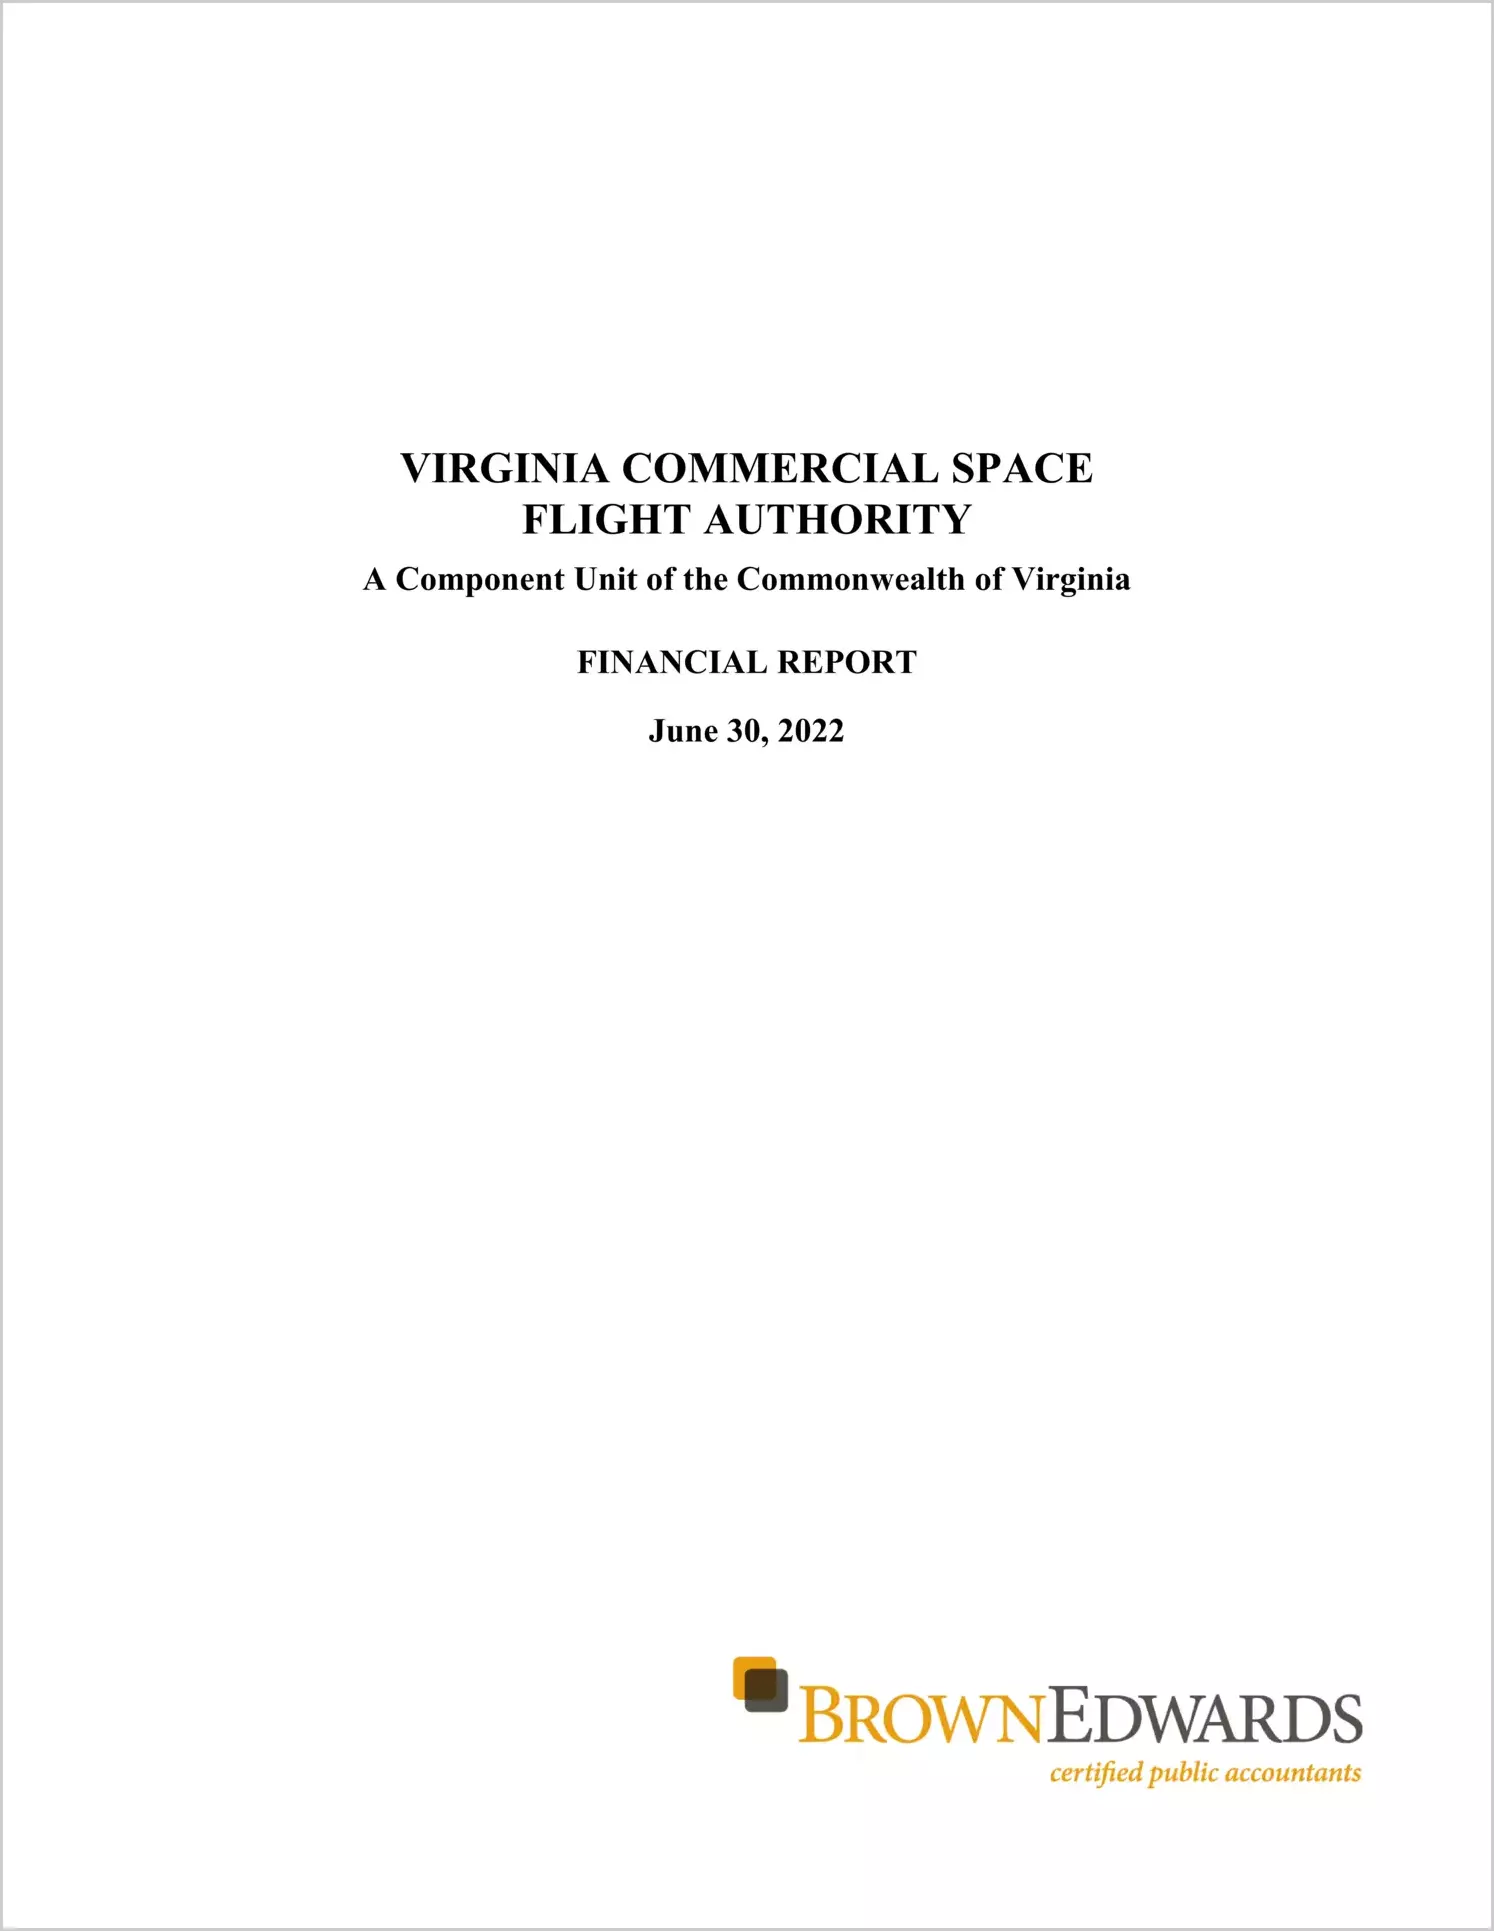 Virginia Commercial Space Flight Authority Financial Statements for the year ended June 30, 2022